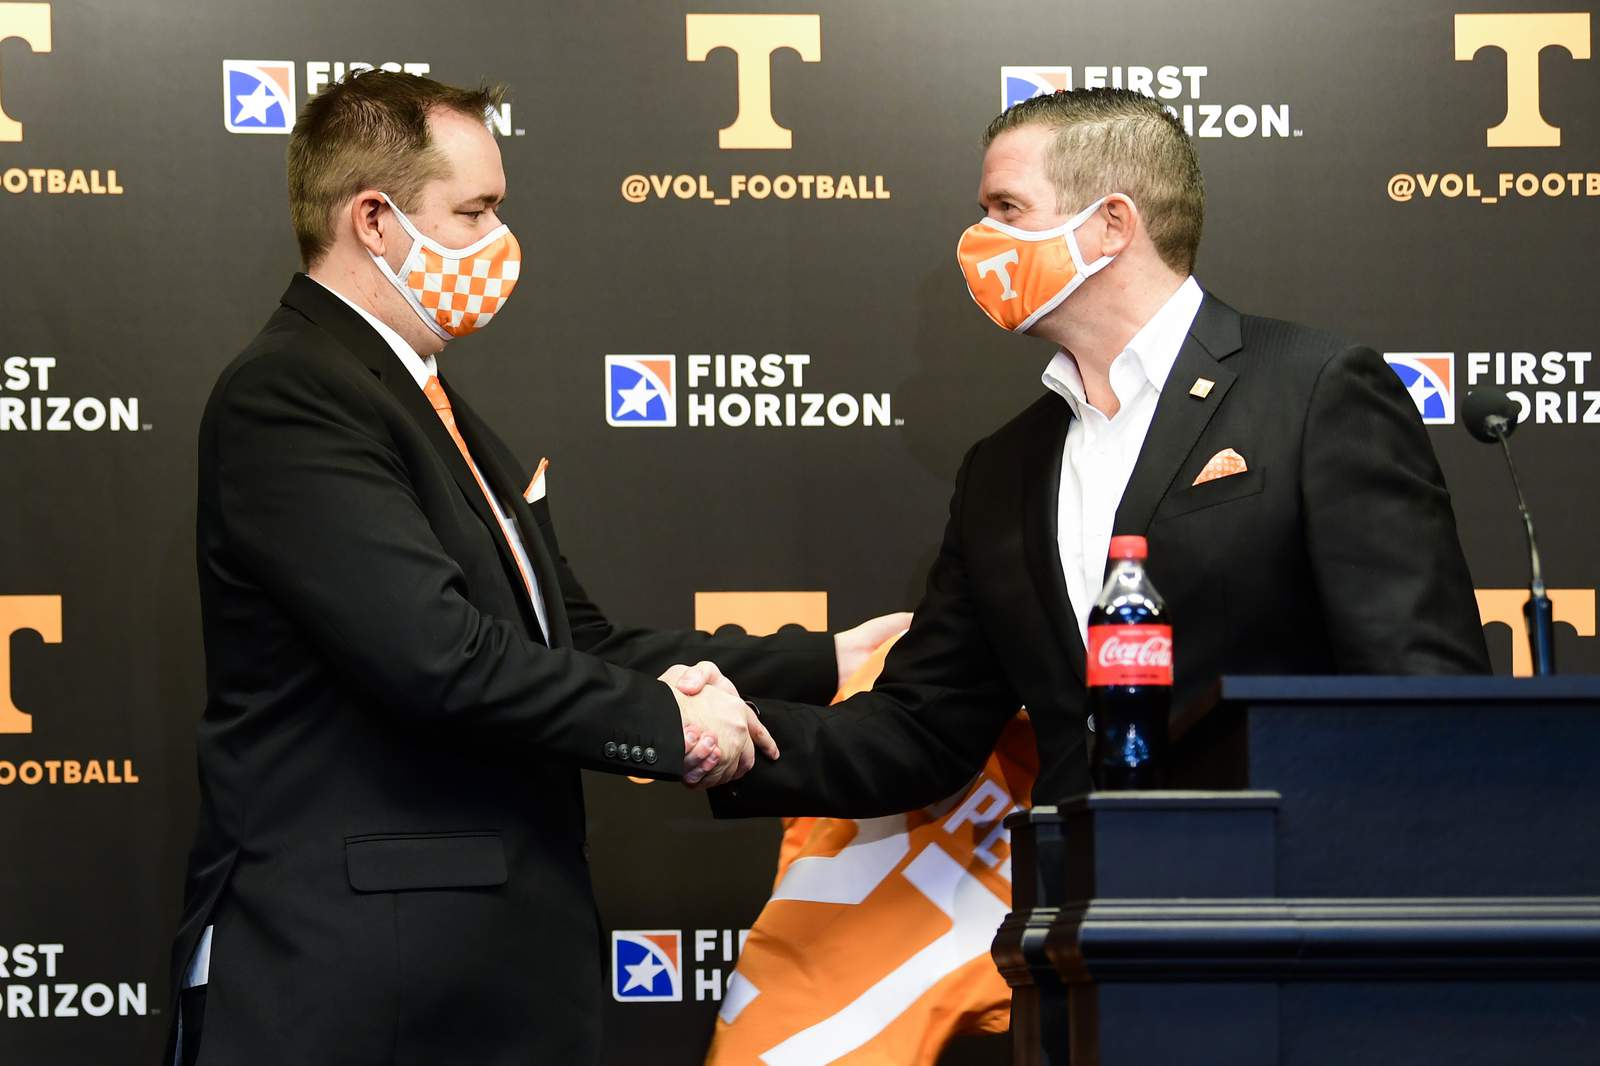 New Tennessee coach not deterred by NCAA investigation